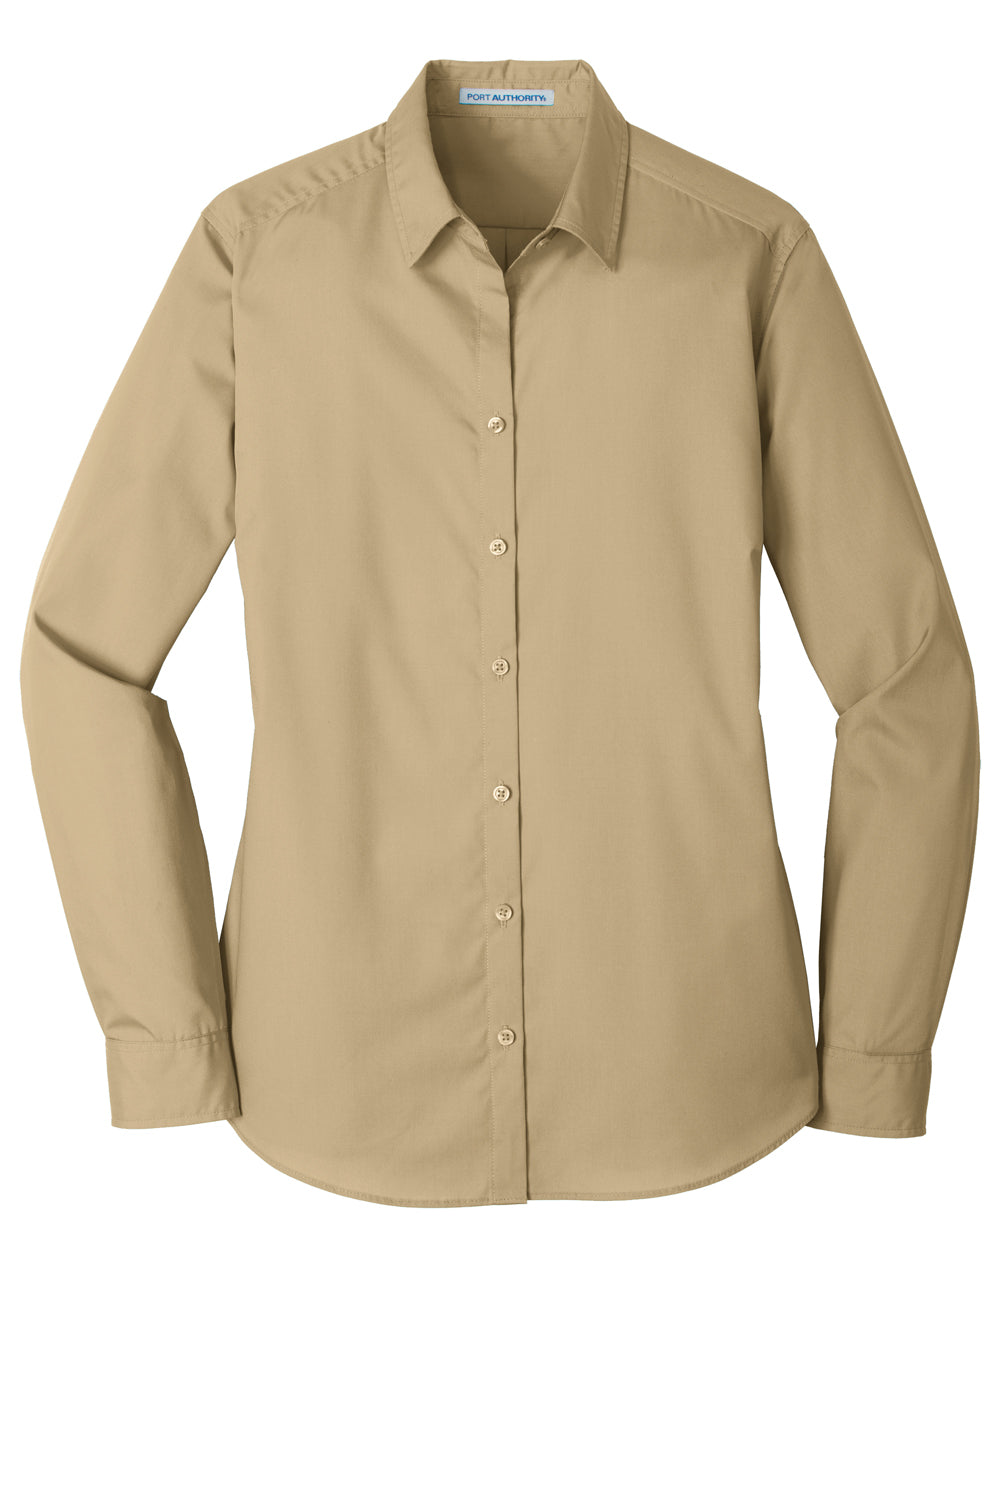 Port Authority LW100 Womens Carefree Stain Resistant Long Sleeve Button Down Shirt Wheat Flat Front